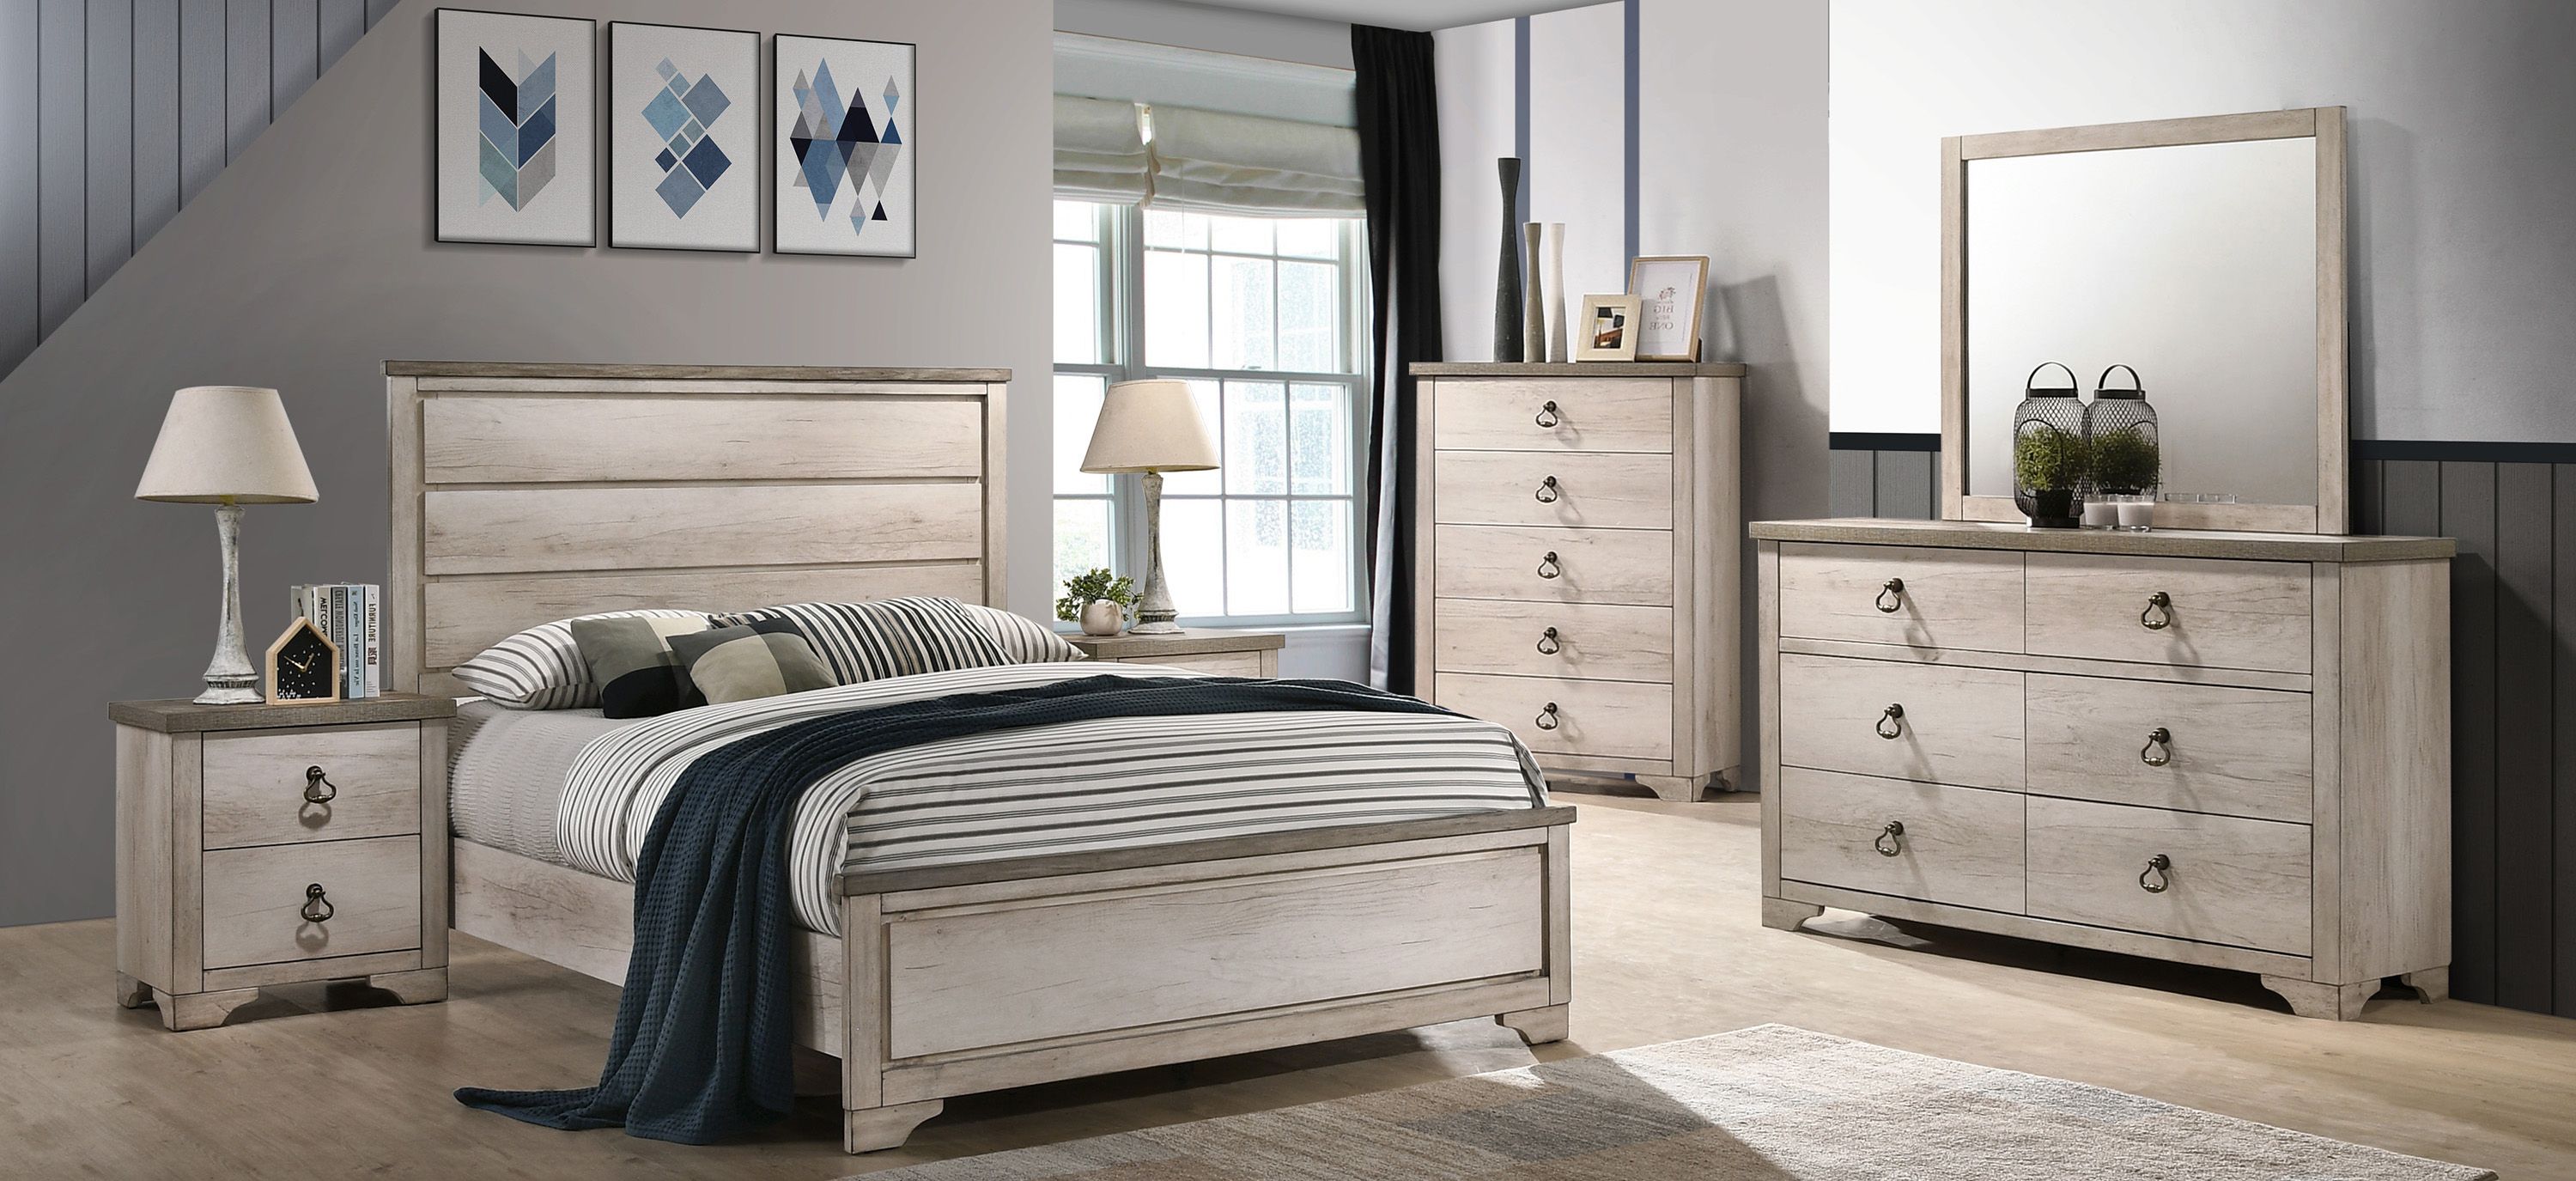 Patterson 5-pc. Twin Bedroom Set